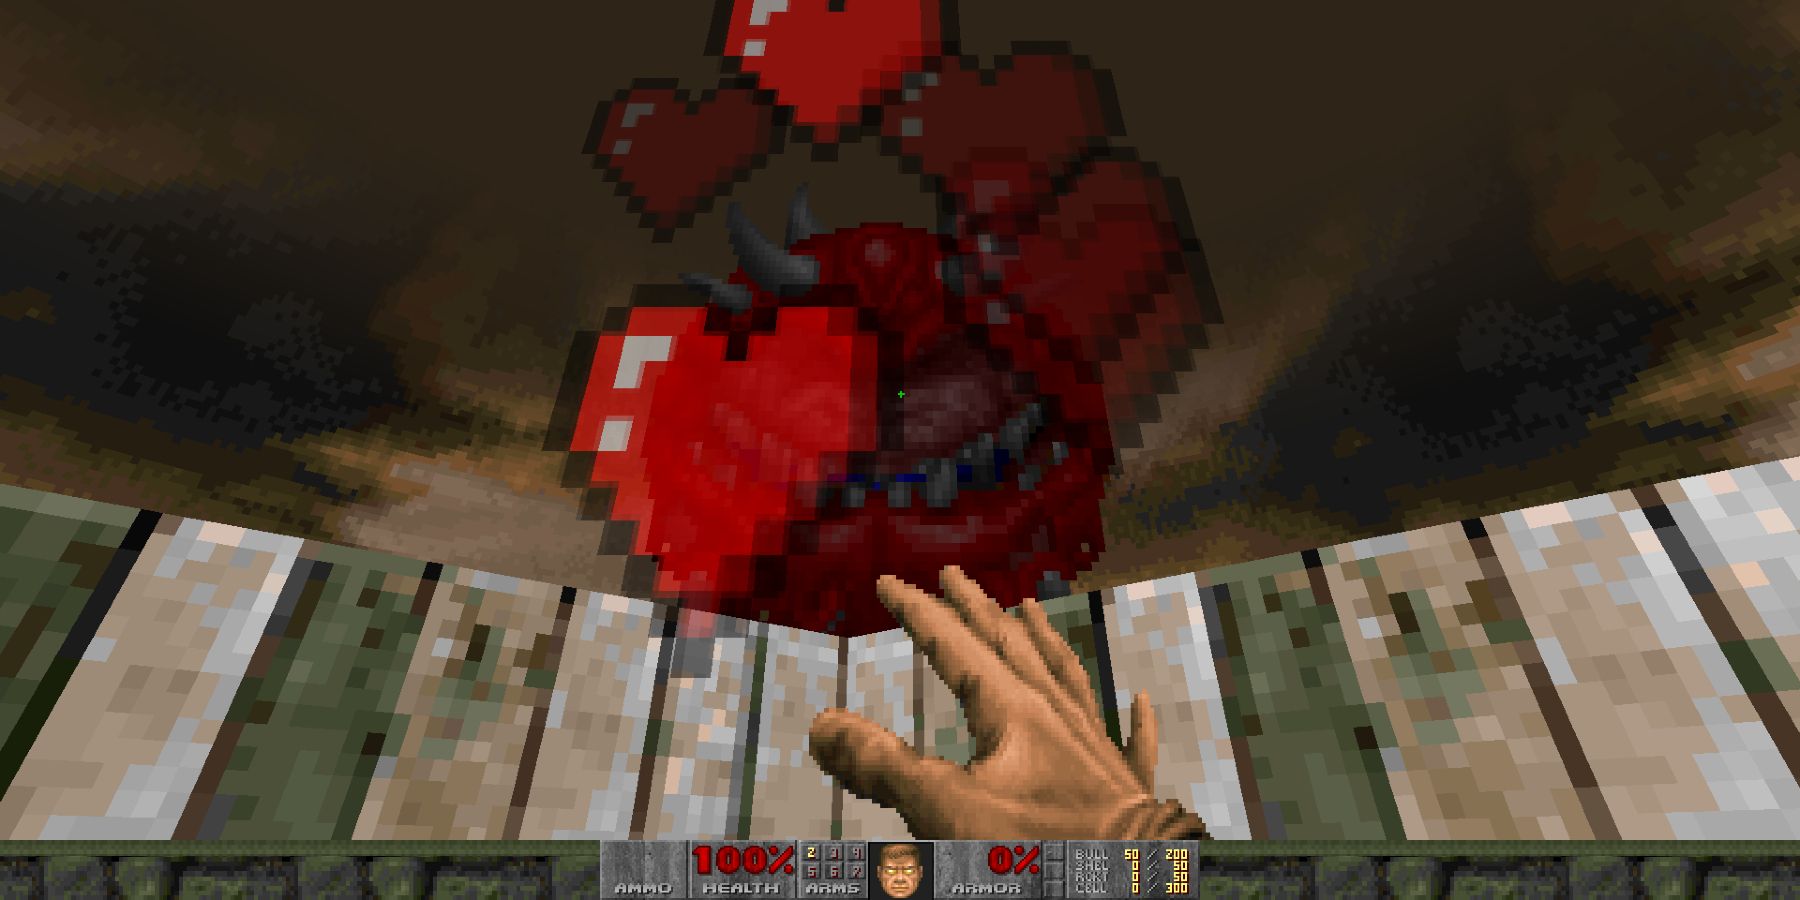 Image from Doom showing a hand reaching up to pet a Cacodemon.